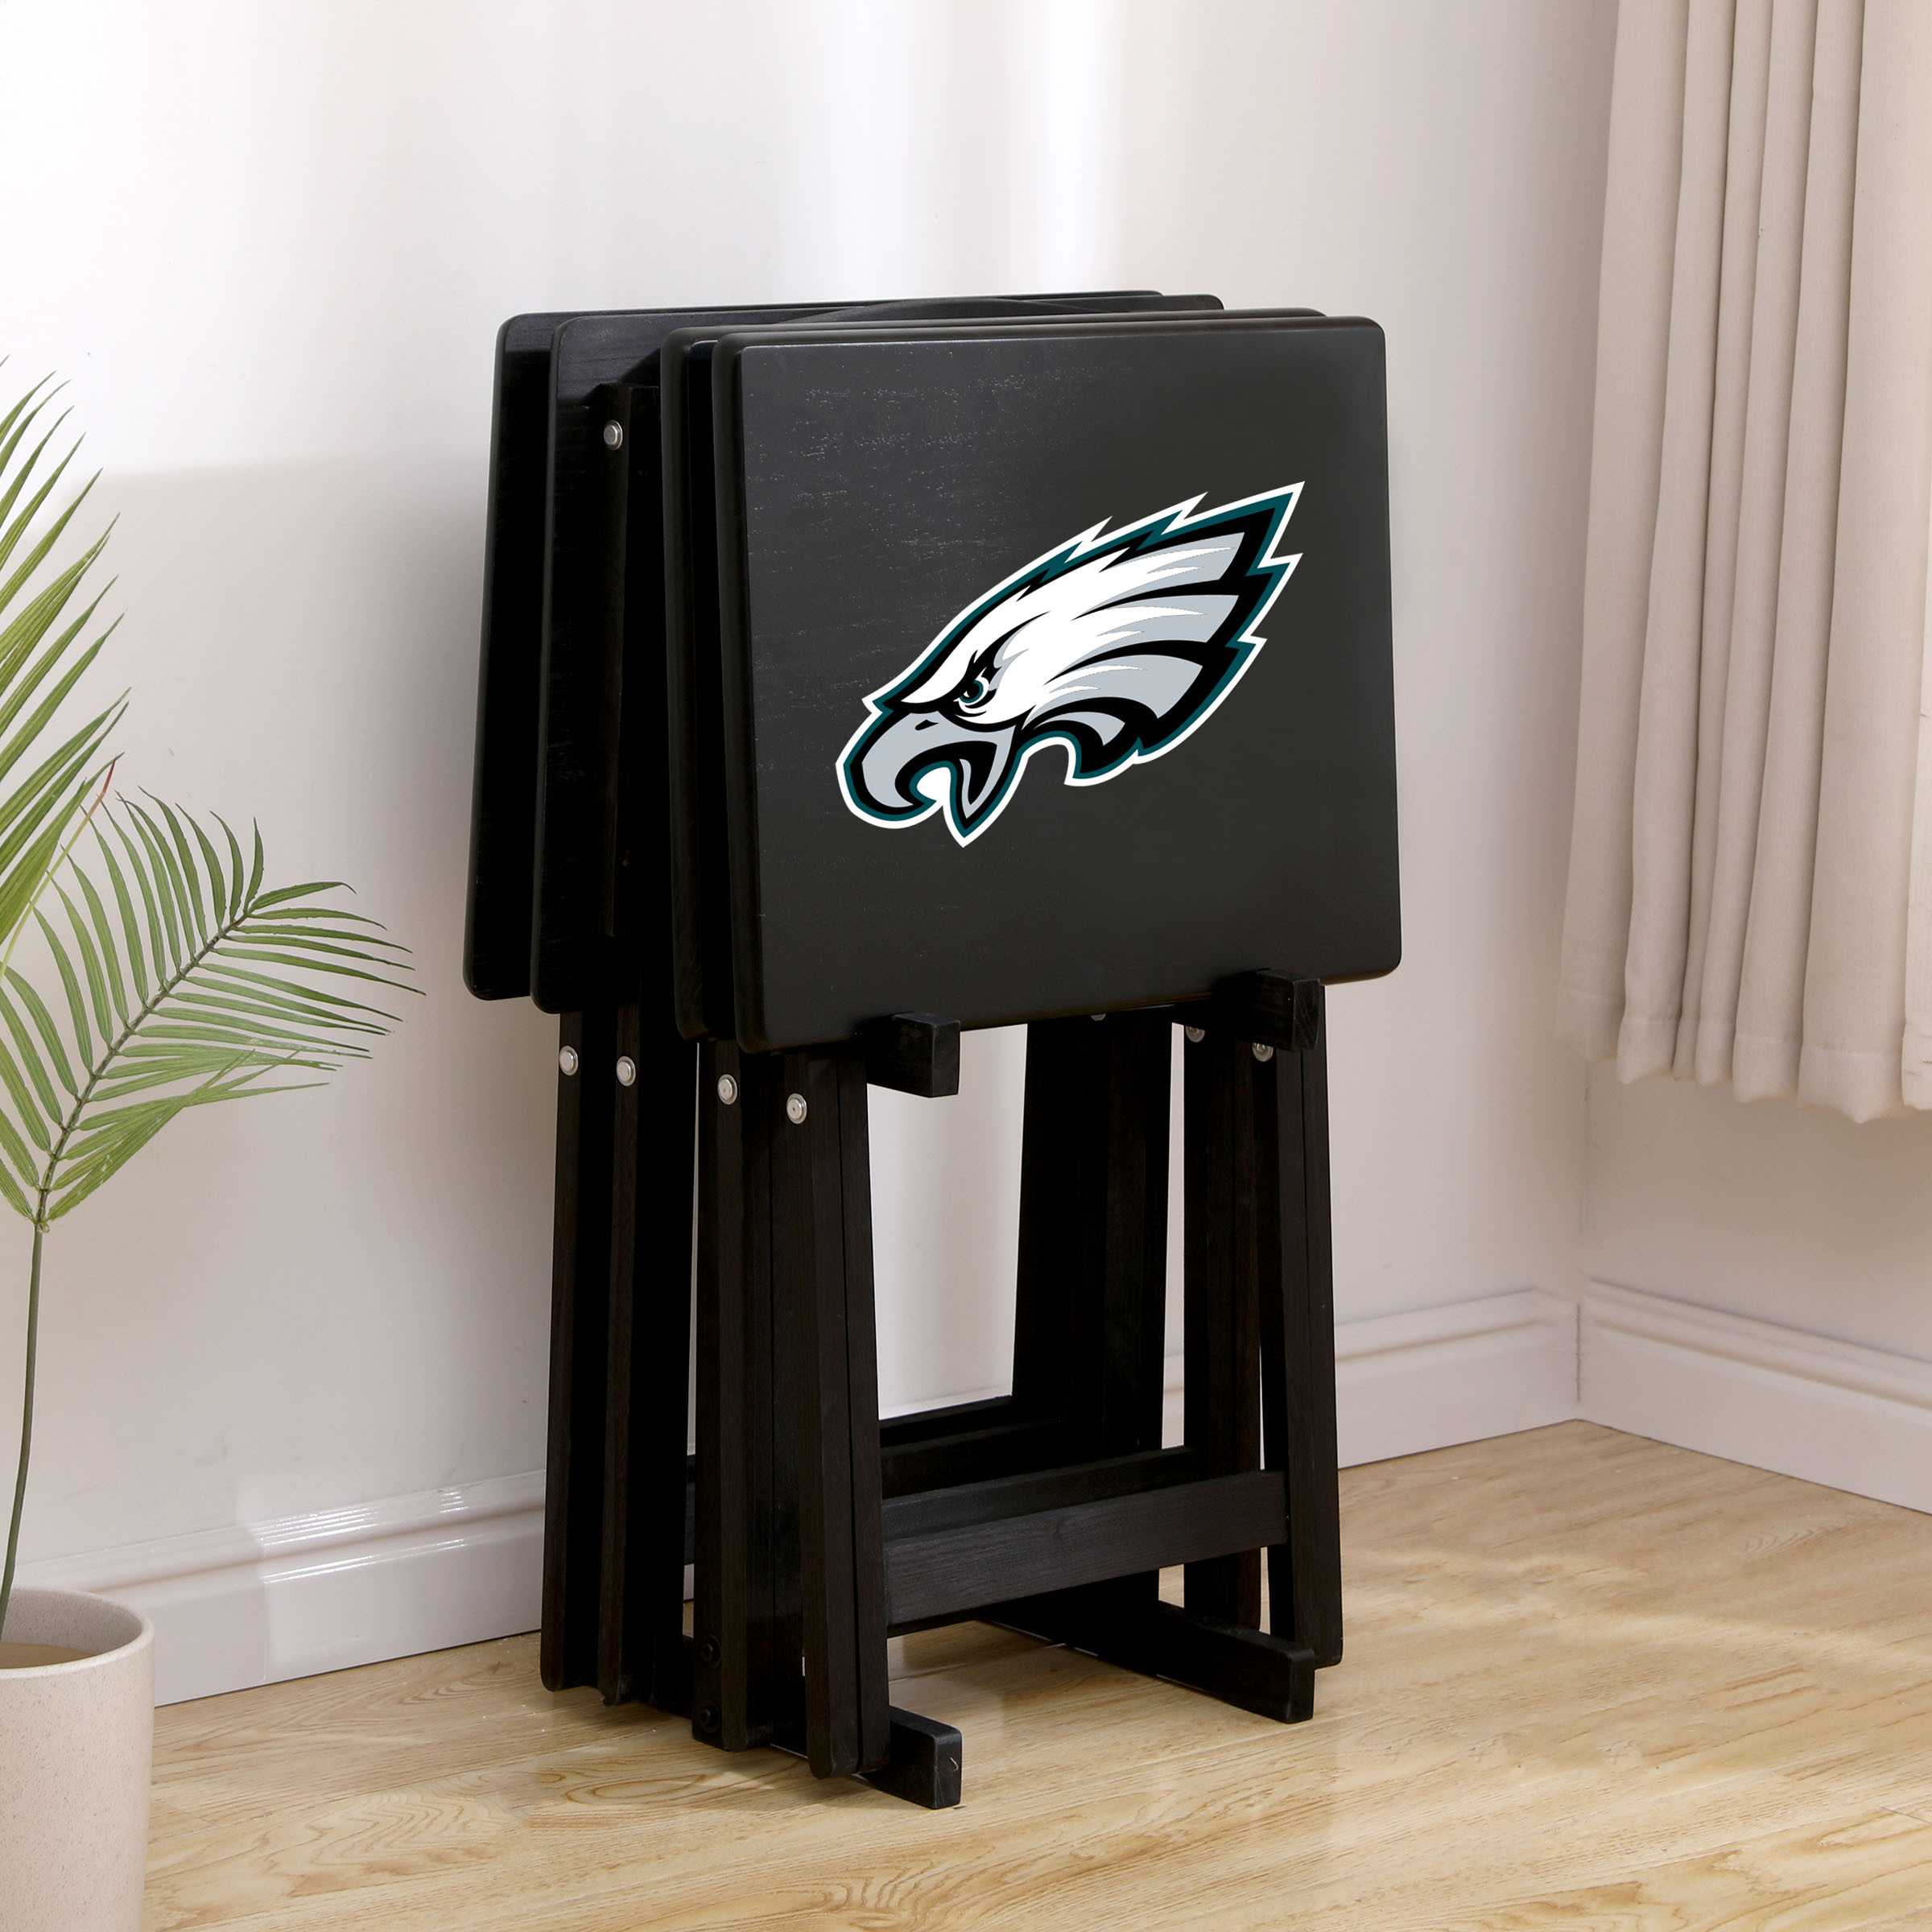 PHILADELPHIA EAGLES 4 TV TRAYS WITH STAND